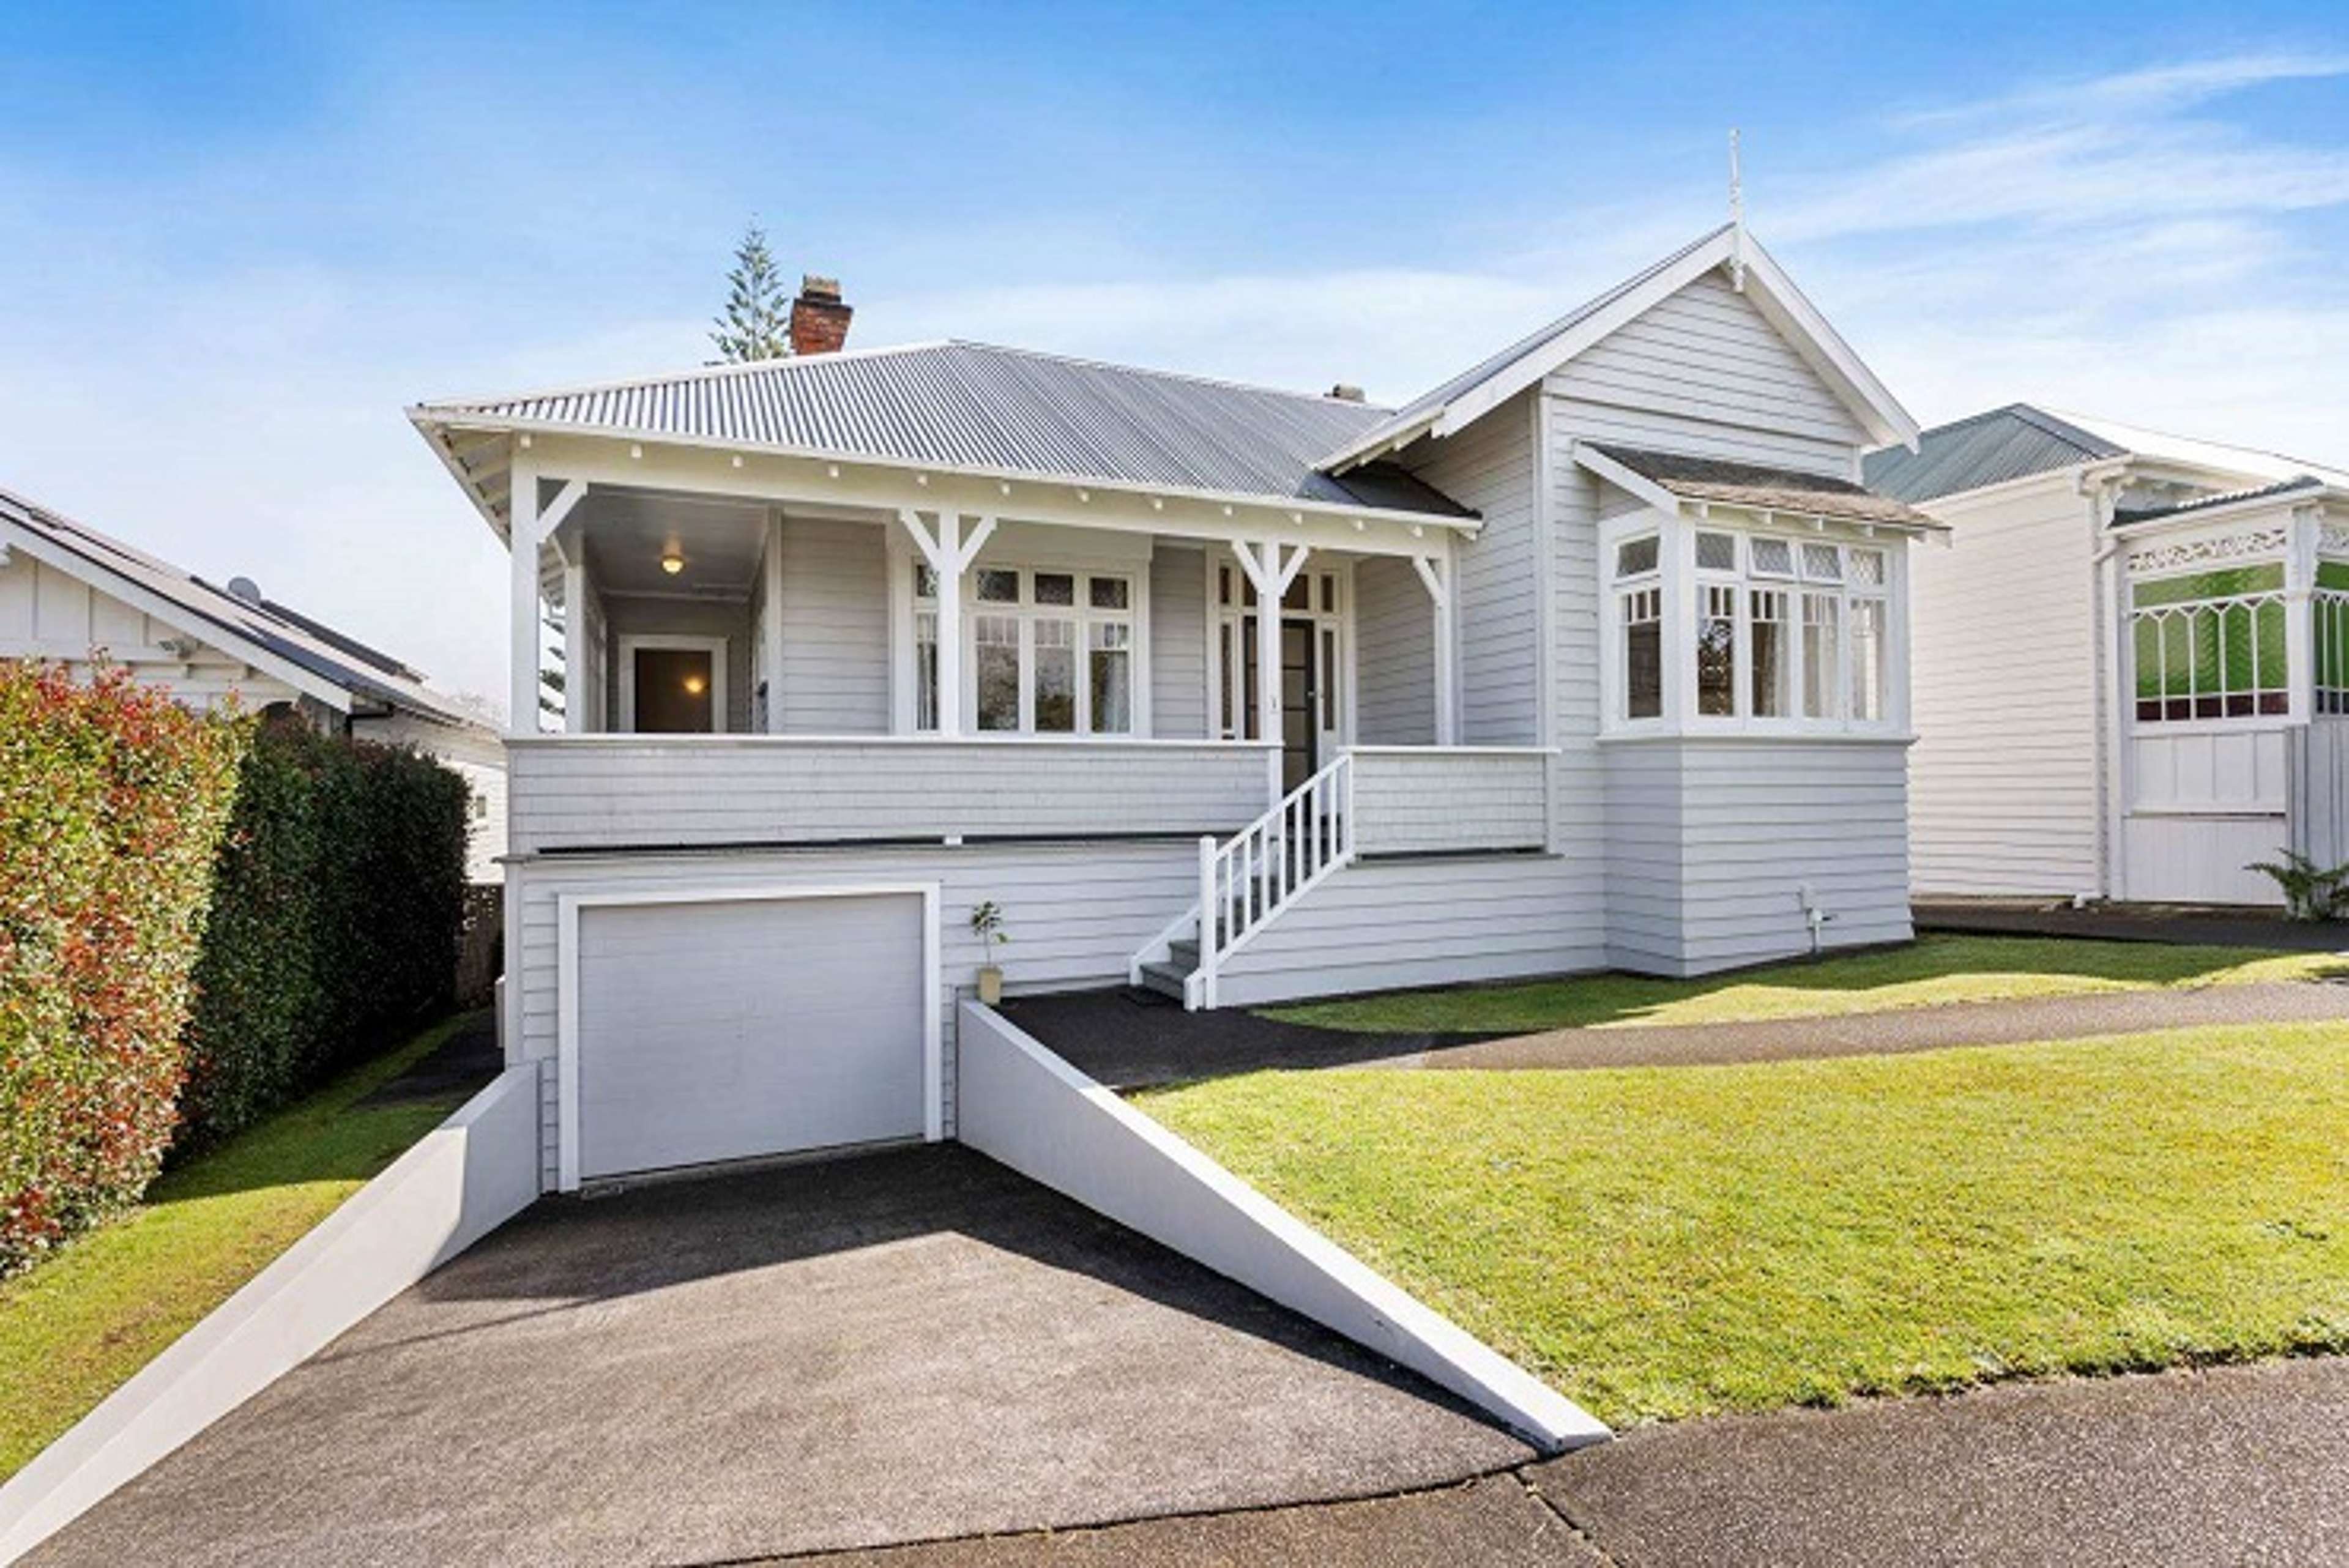 Auckland house with no backyard sells for over $2m